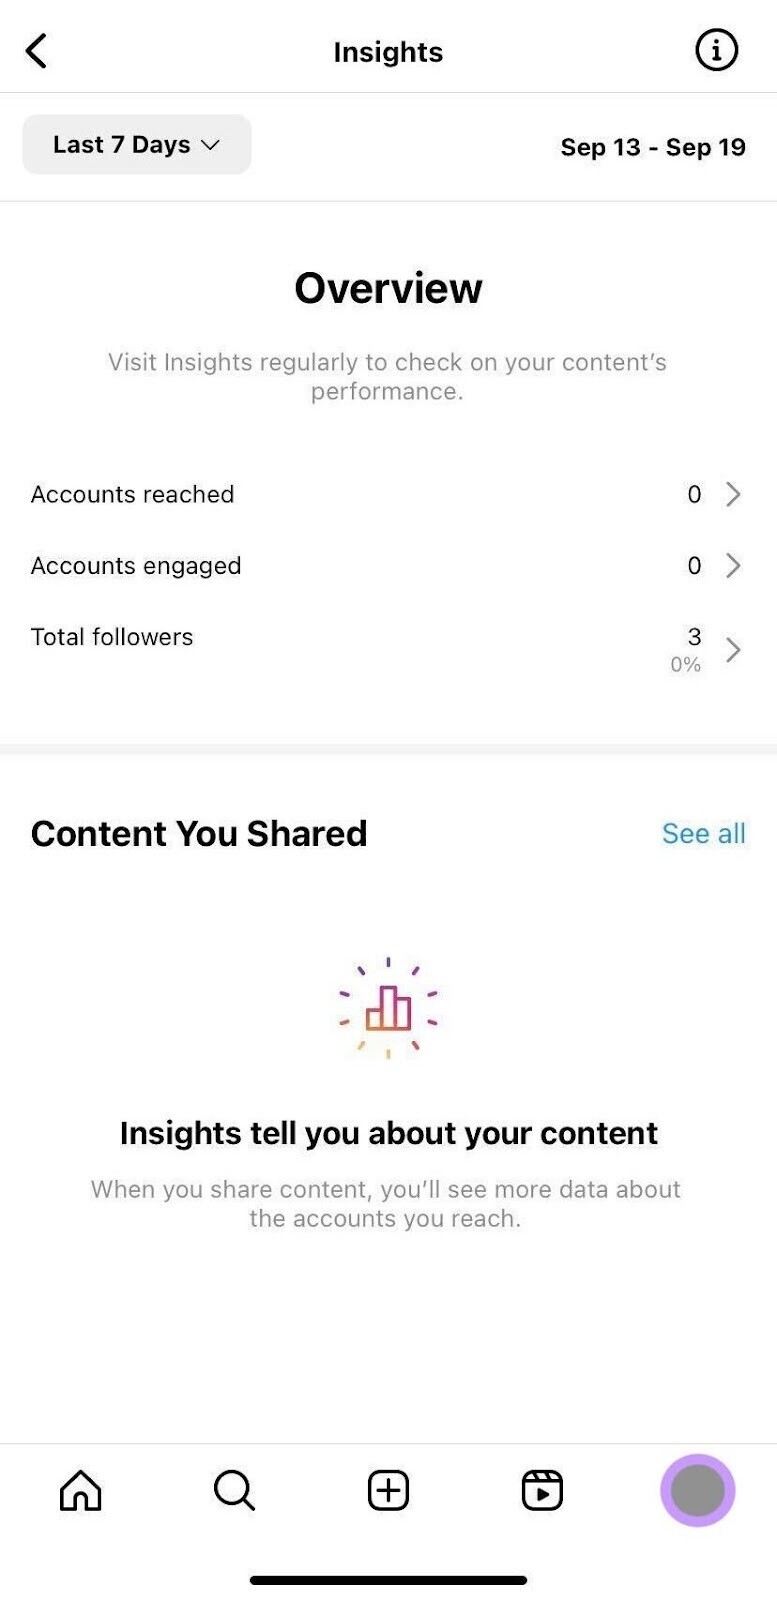 Instagram analytics "Overview" page